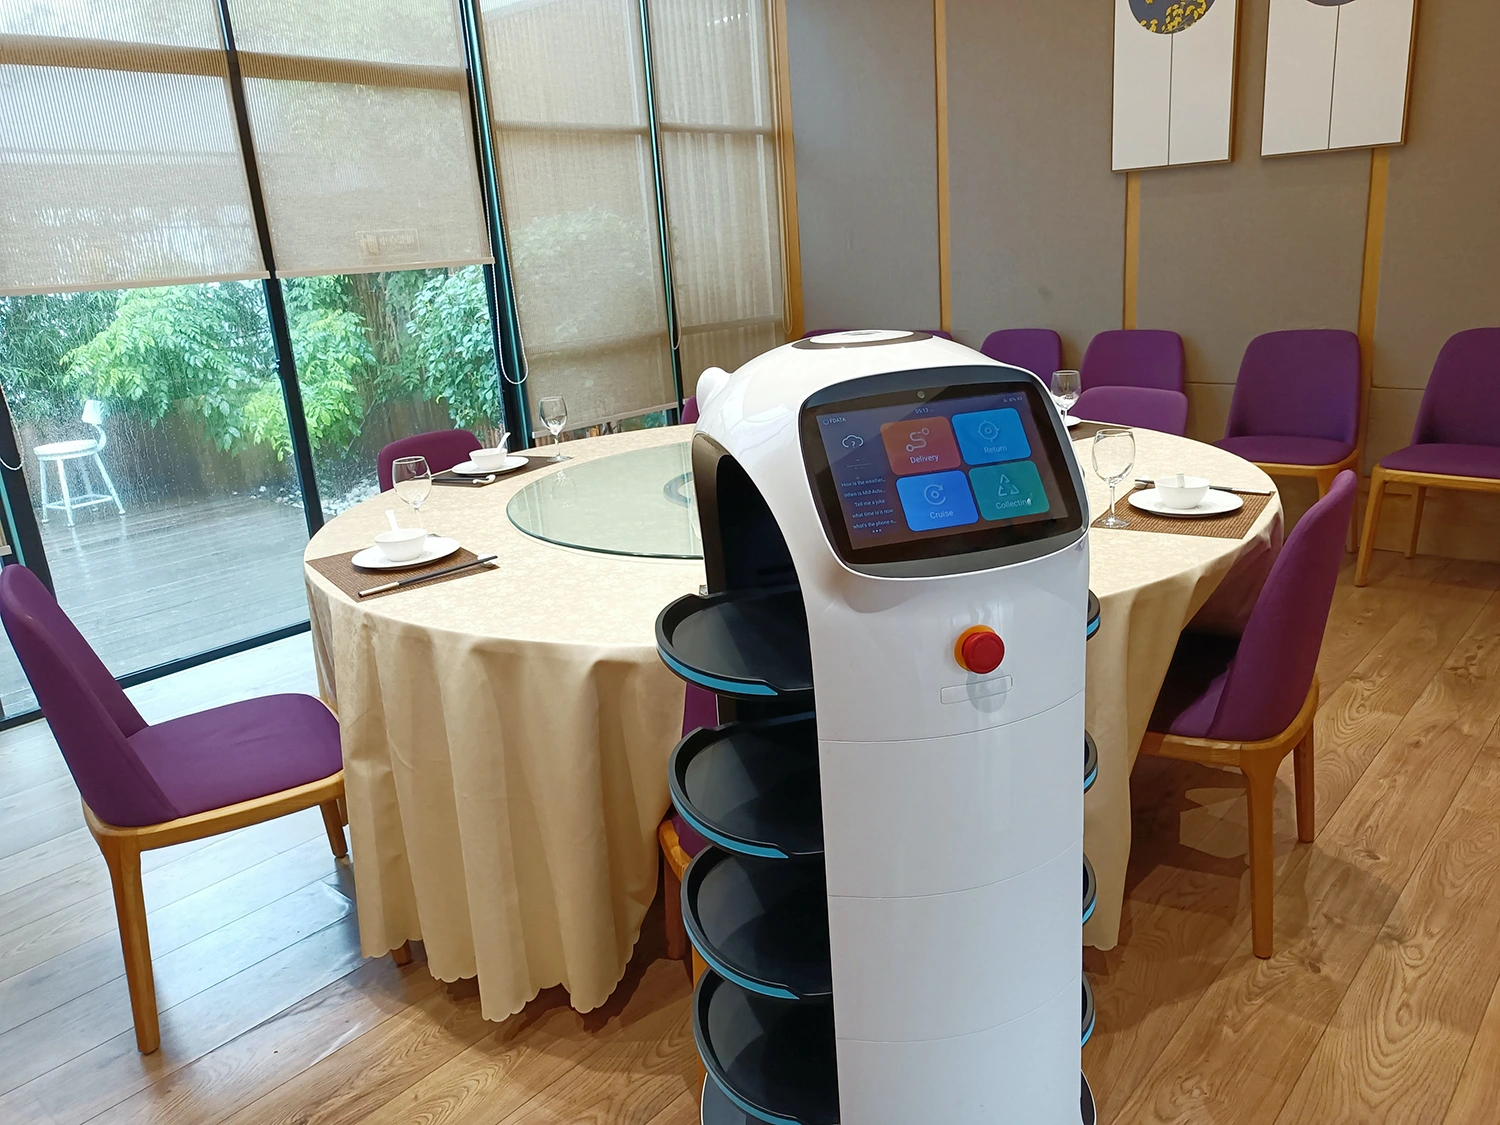 Restaurant technology, like this robot waiter that delivers meals to tables, is crucial for restaurant success today.